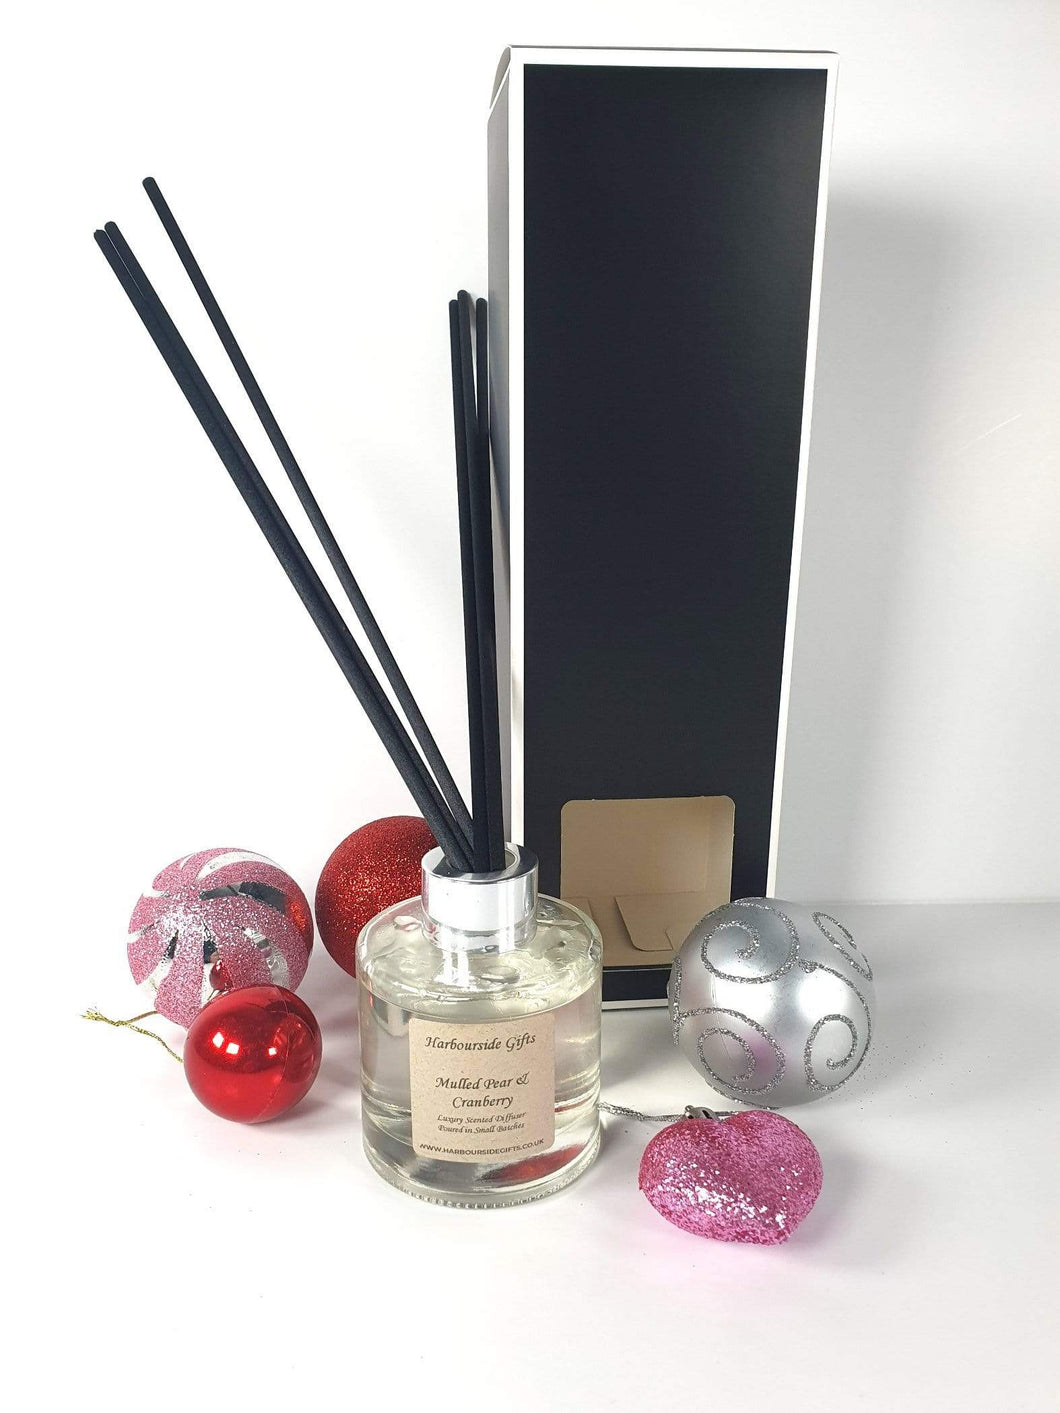 Mulled Pear & Cranberry Reed Diffuser 100ml with 6 High Quality Reeds in a Gift Box MPCD100 Harbourside Gifts